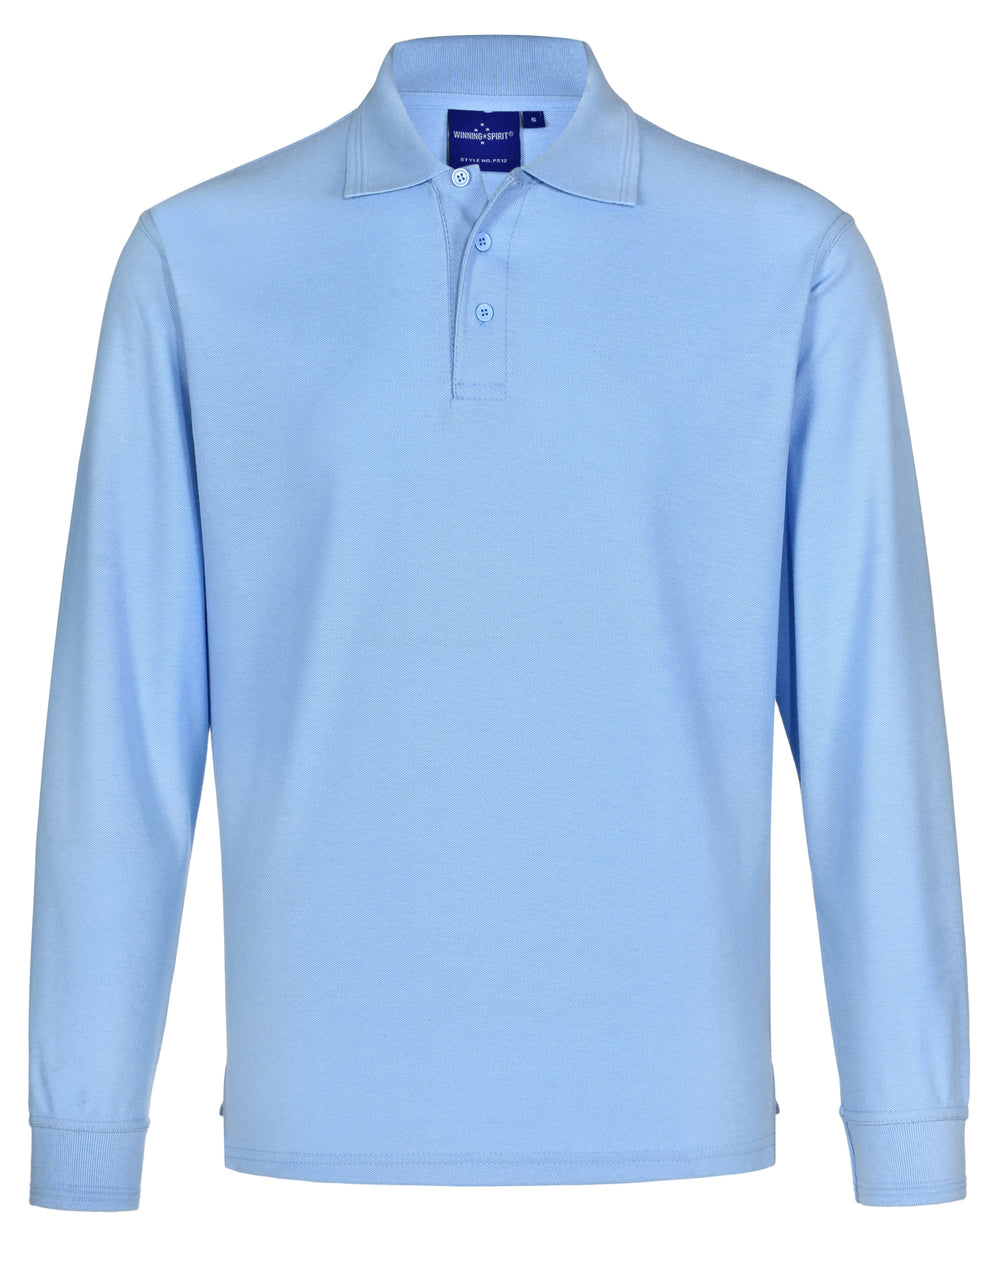 PS12 Unisex Traditional Poly/Cotton Pique Long Sleeve Polo